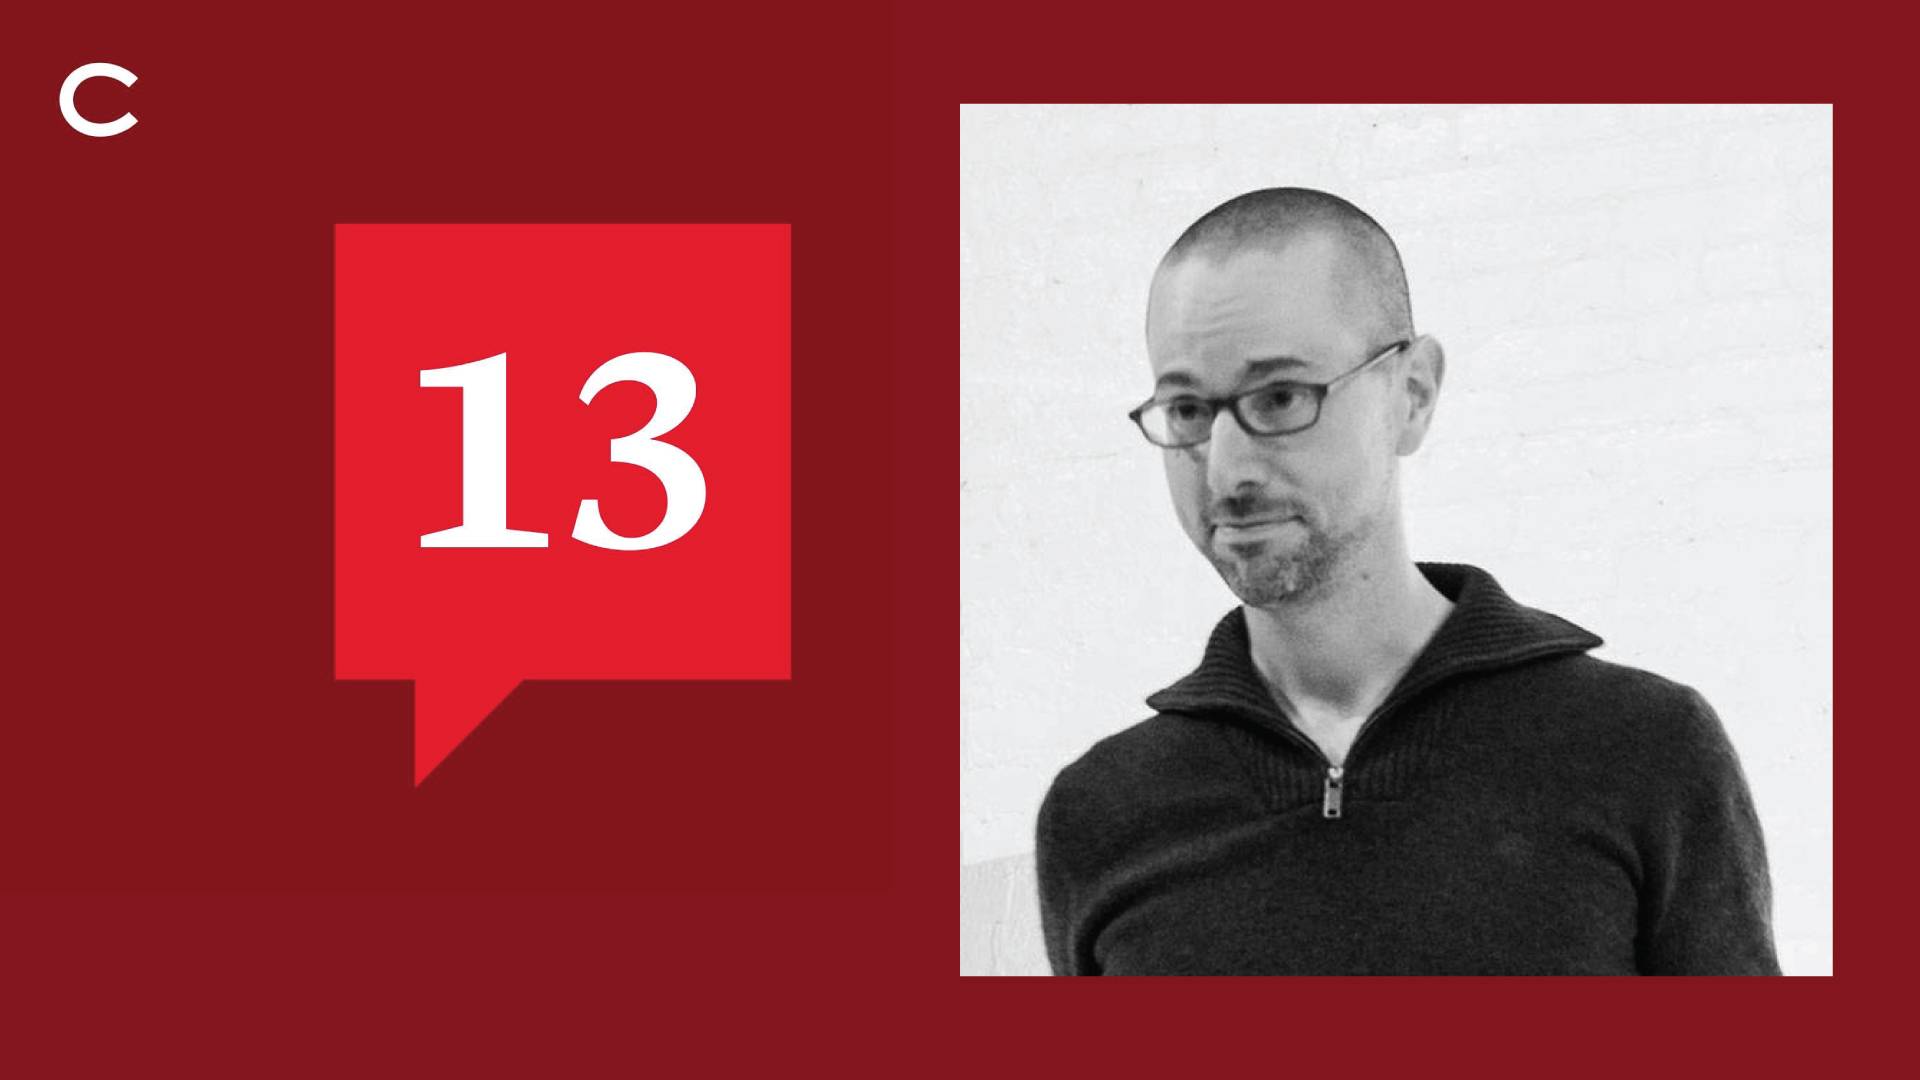 13 Podcast logo in red on maroon along with Dan Bouk headshot in gray